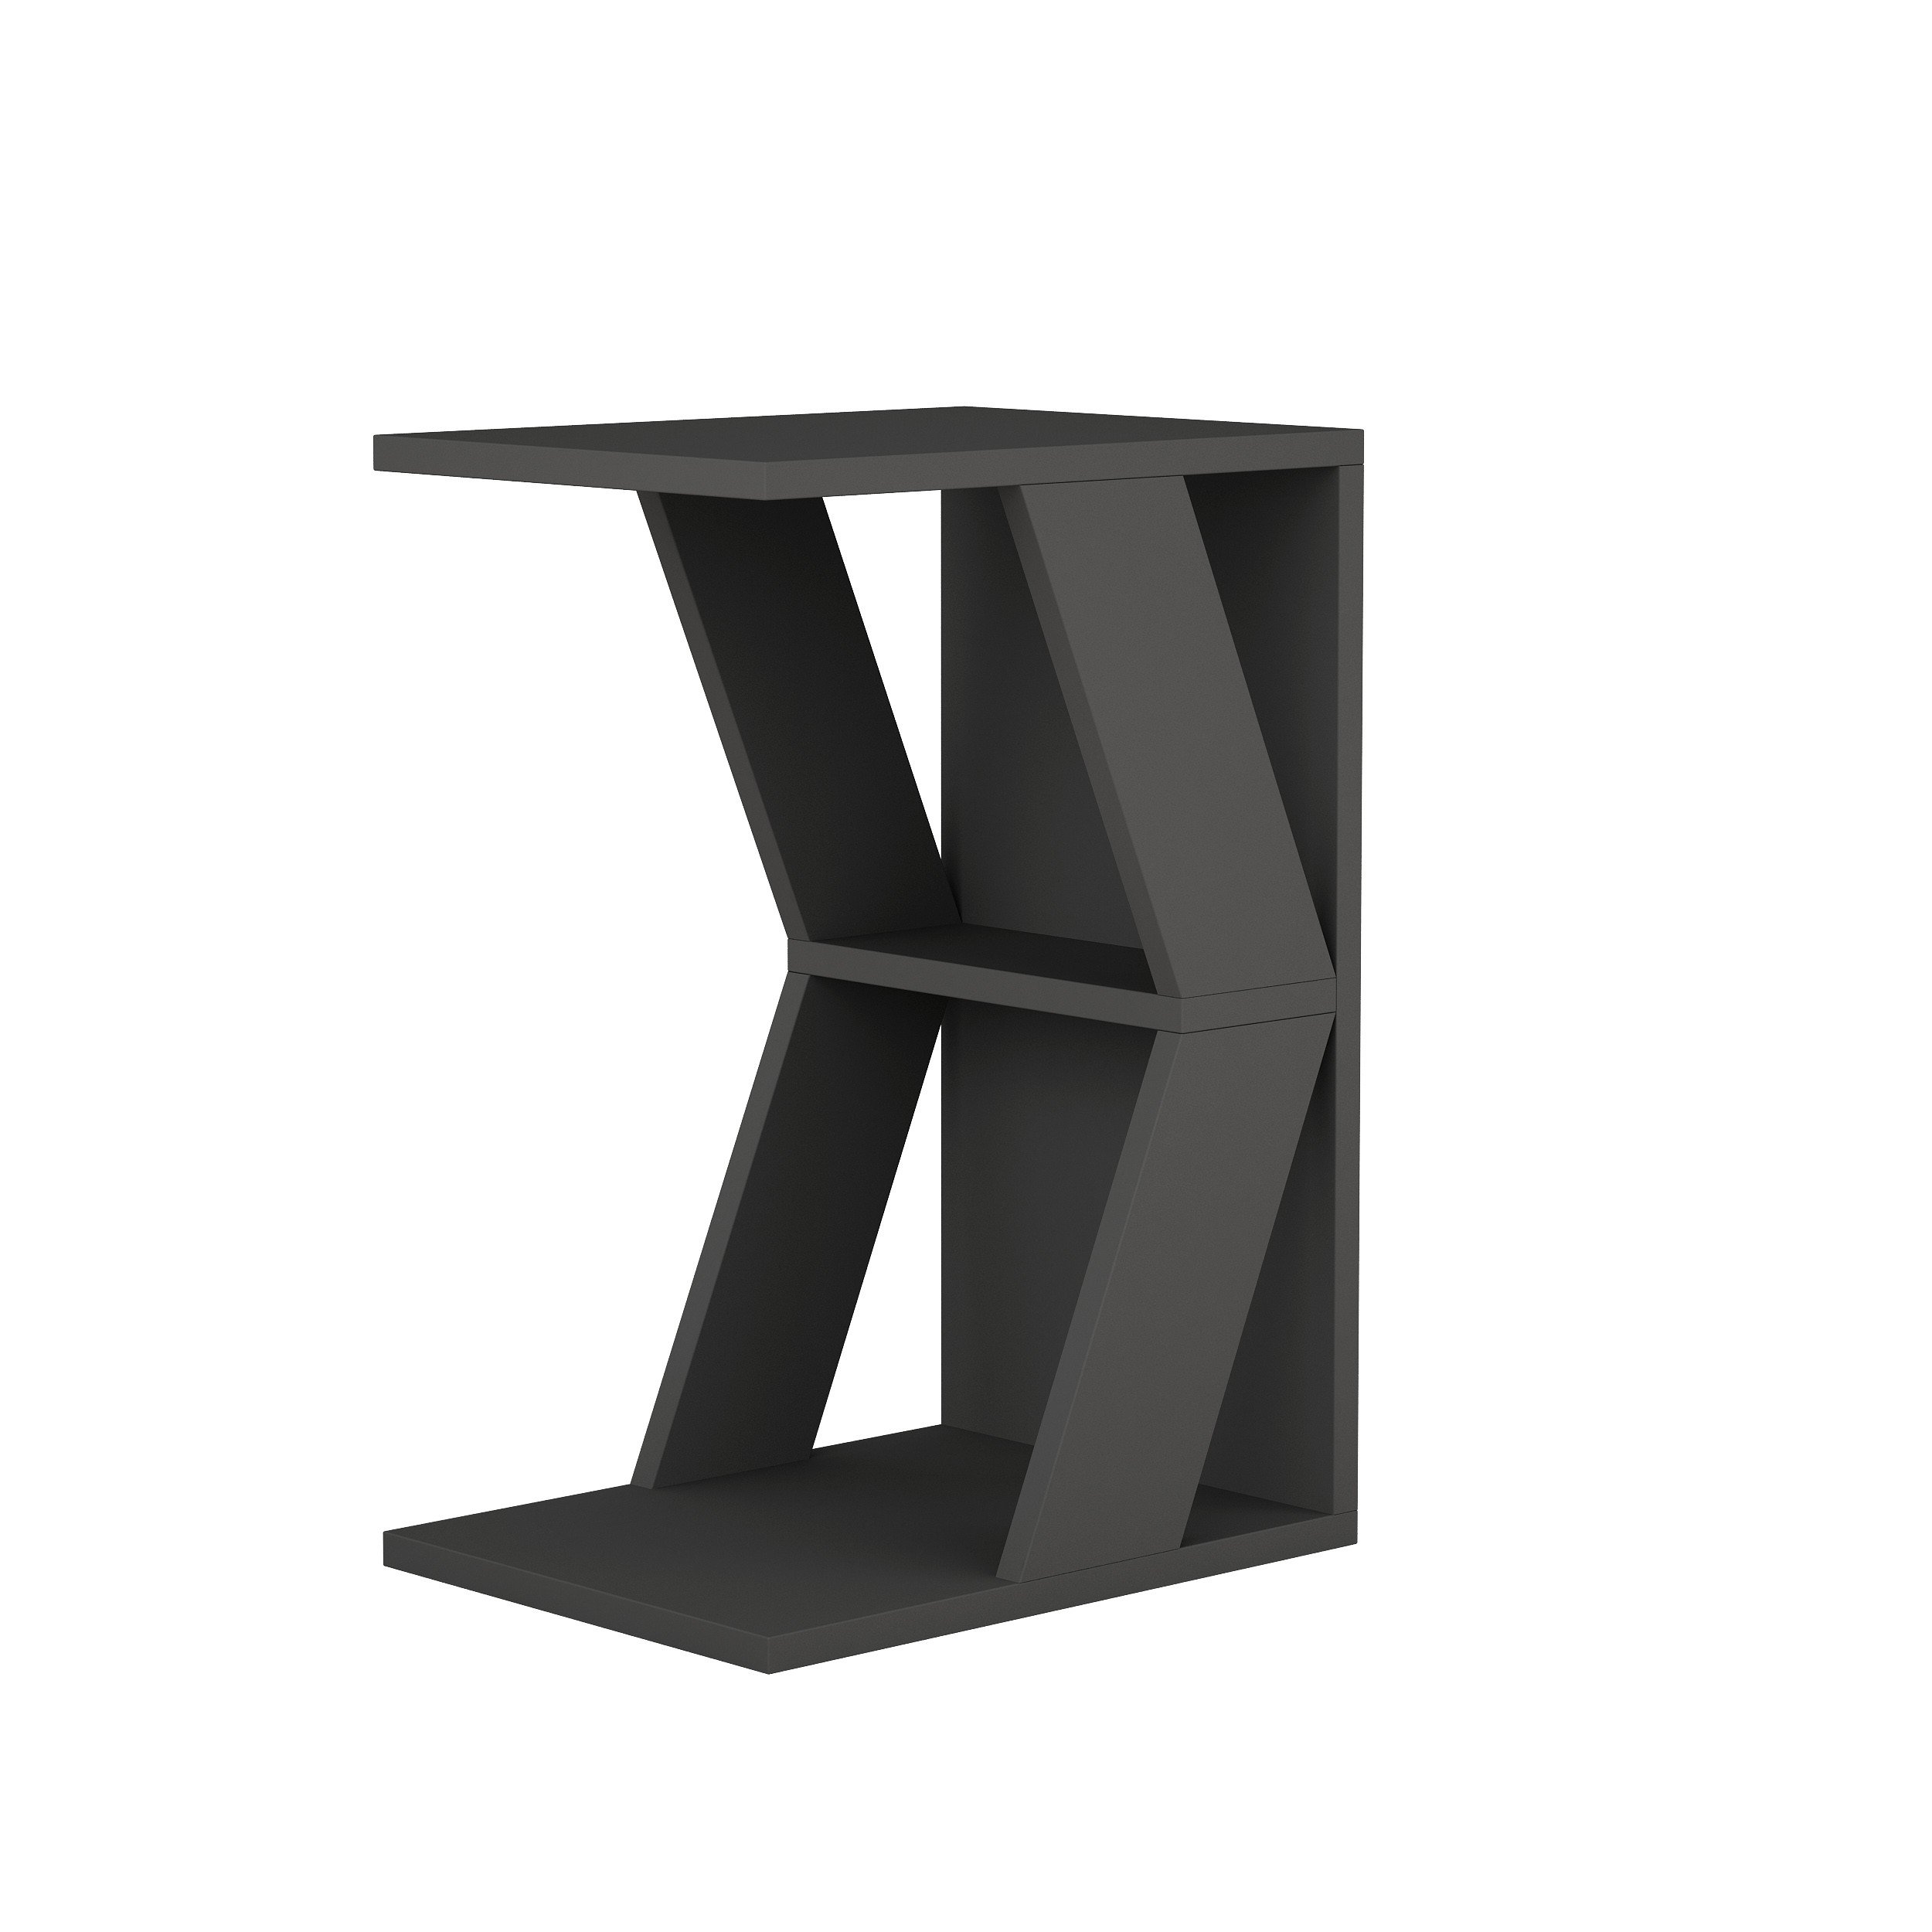 NAZE C TABLE - ANTHRACITE - M.SH.14196.3